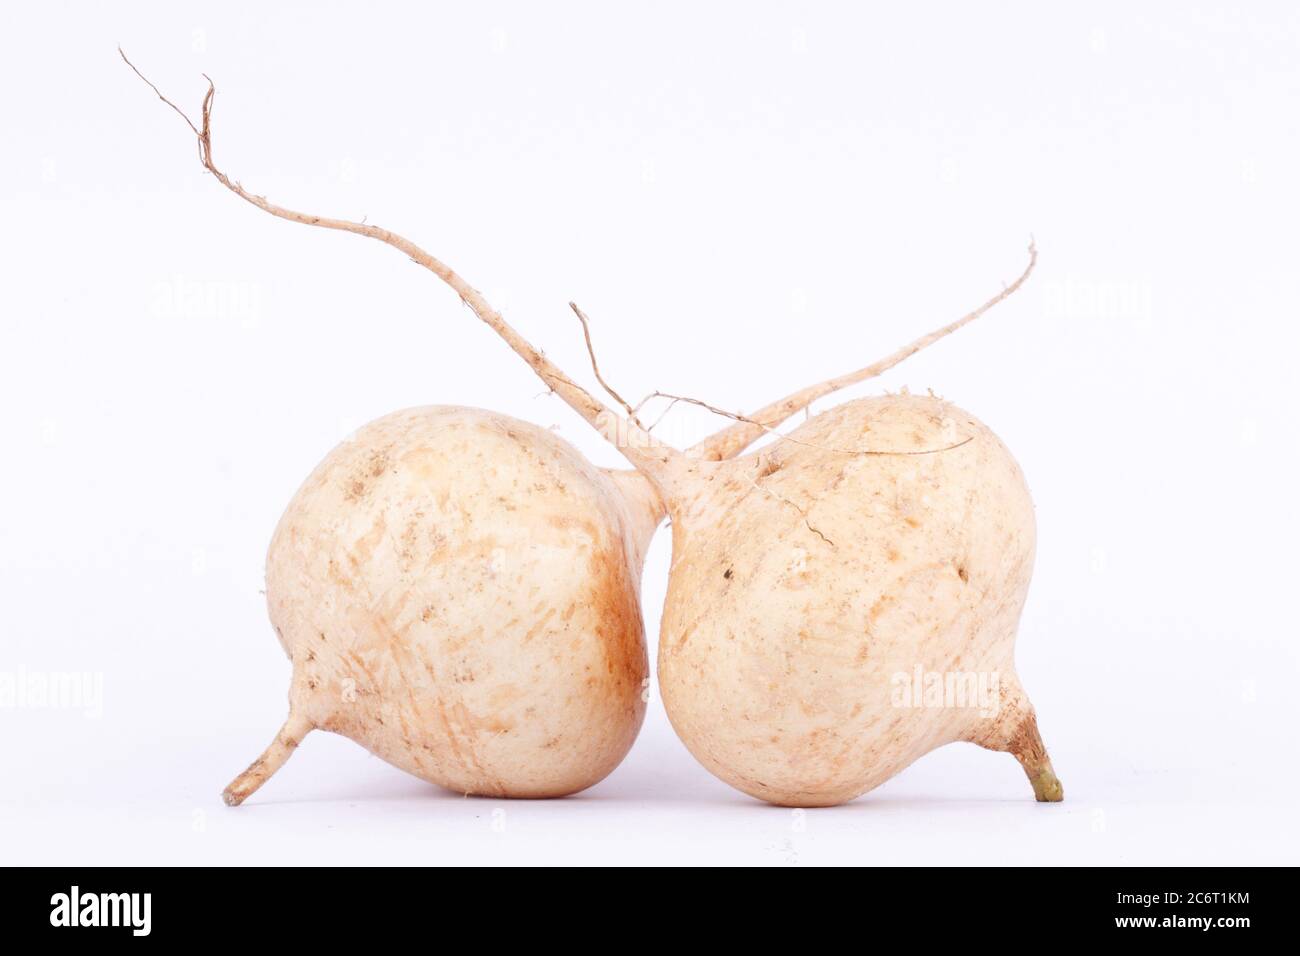 Yam bean ( Jicama ) is bulbous root vegetable fruit on the white background Stock Photo